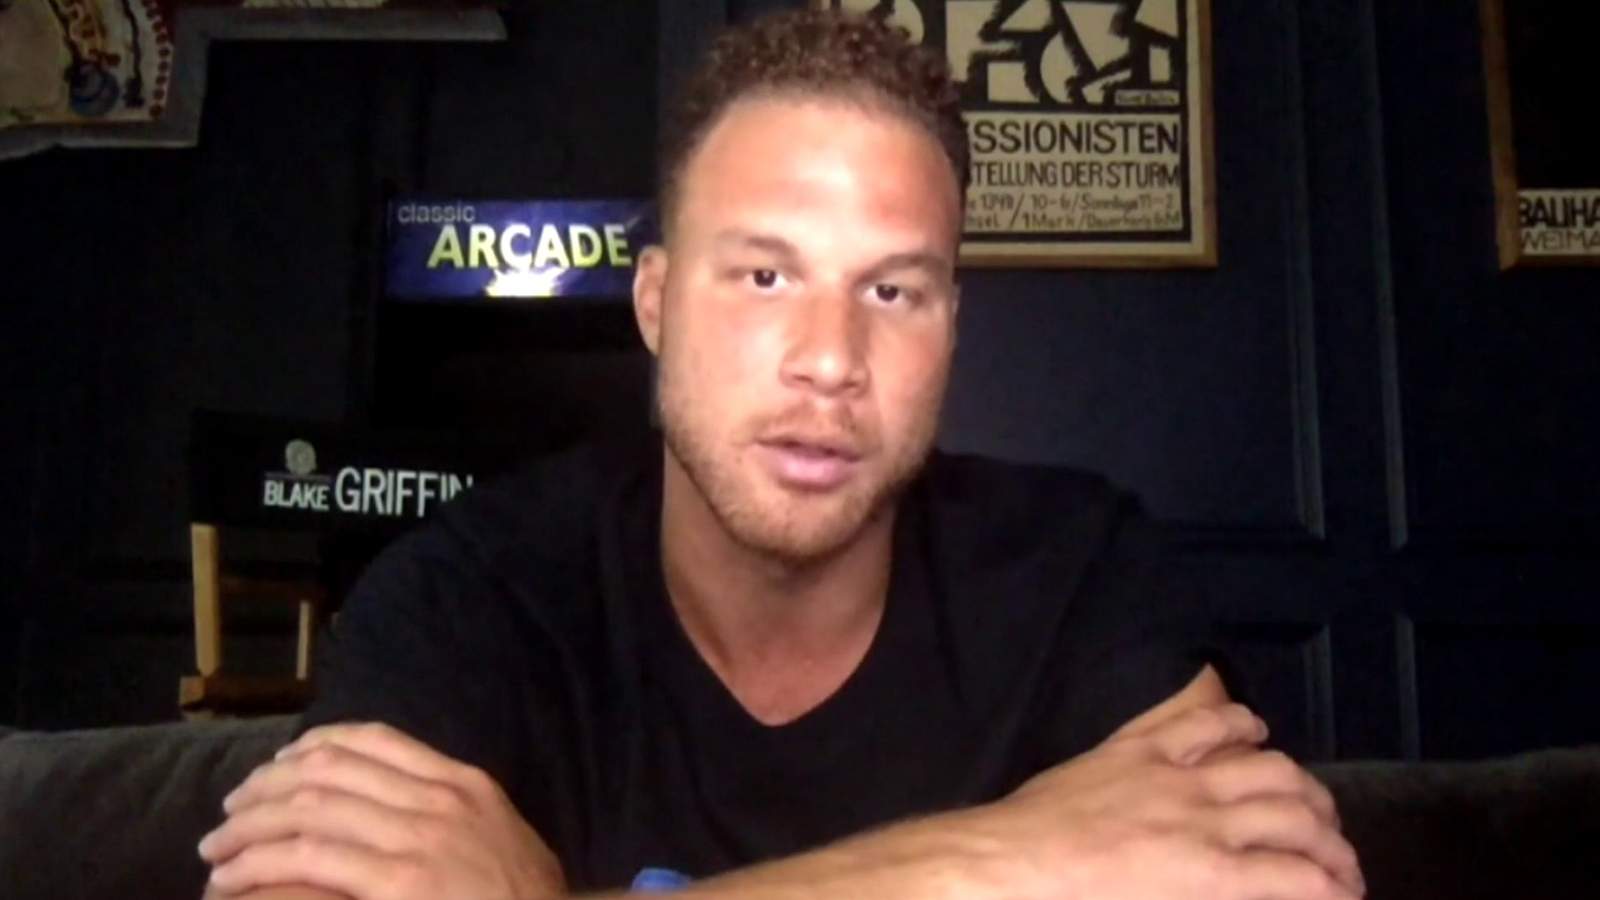 Blake Griffin and Luke Kennard on recent injuries, status, and support of Black Lives Matter movement